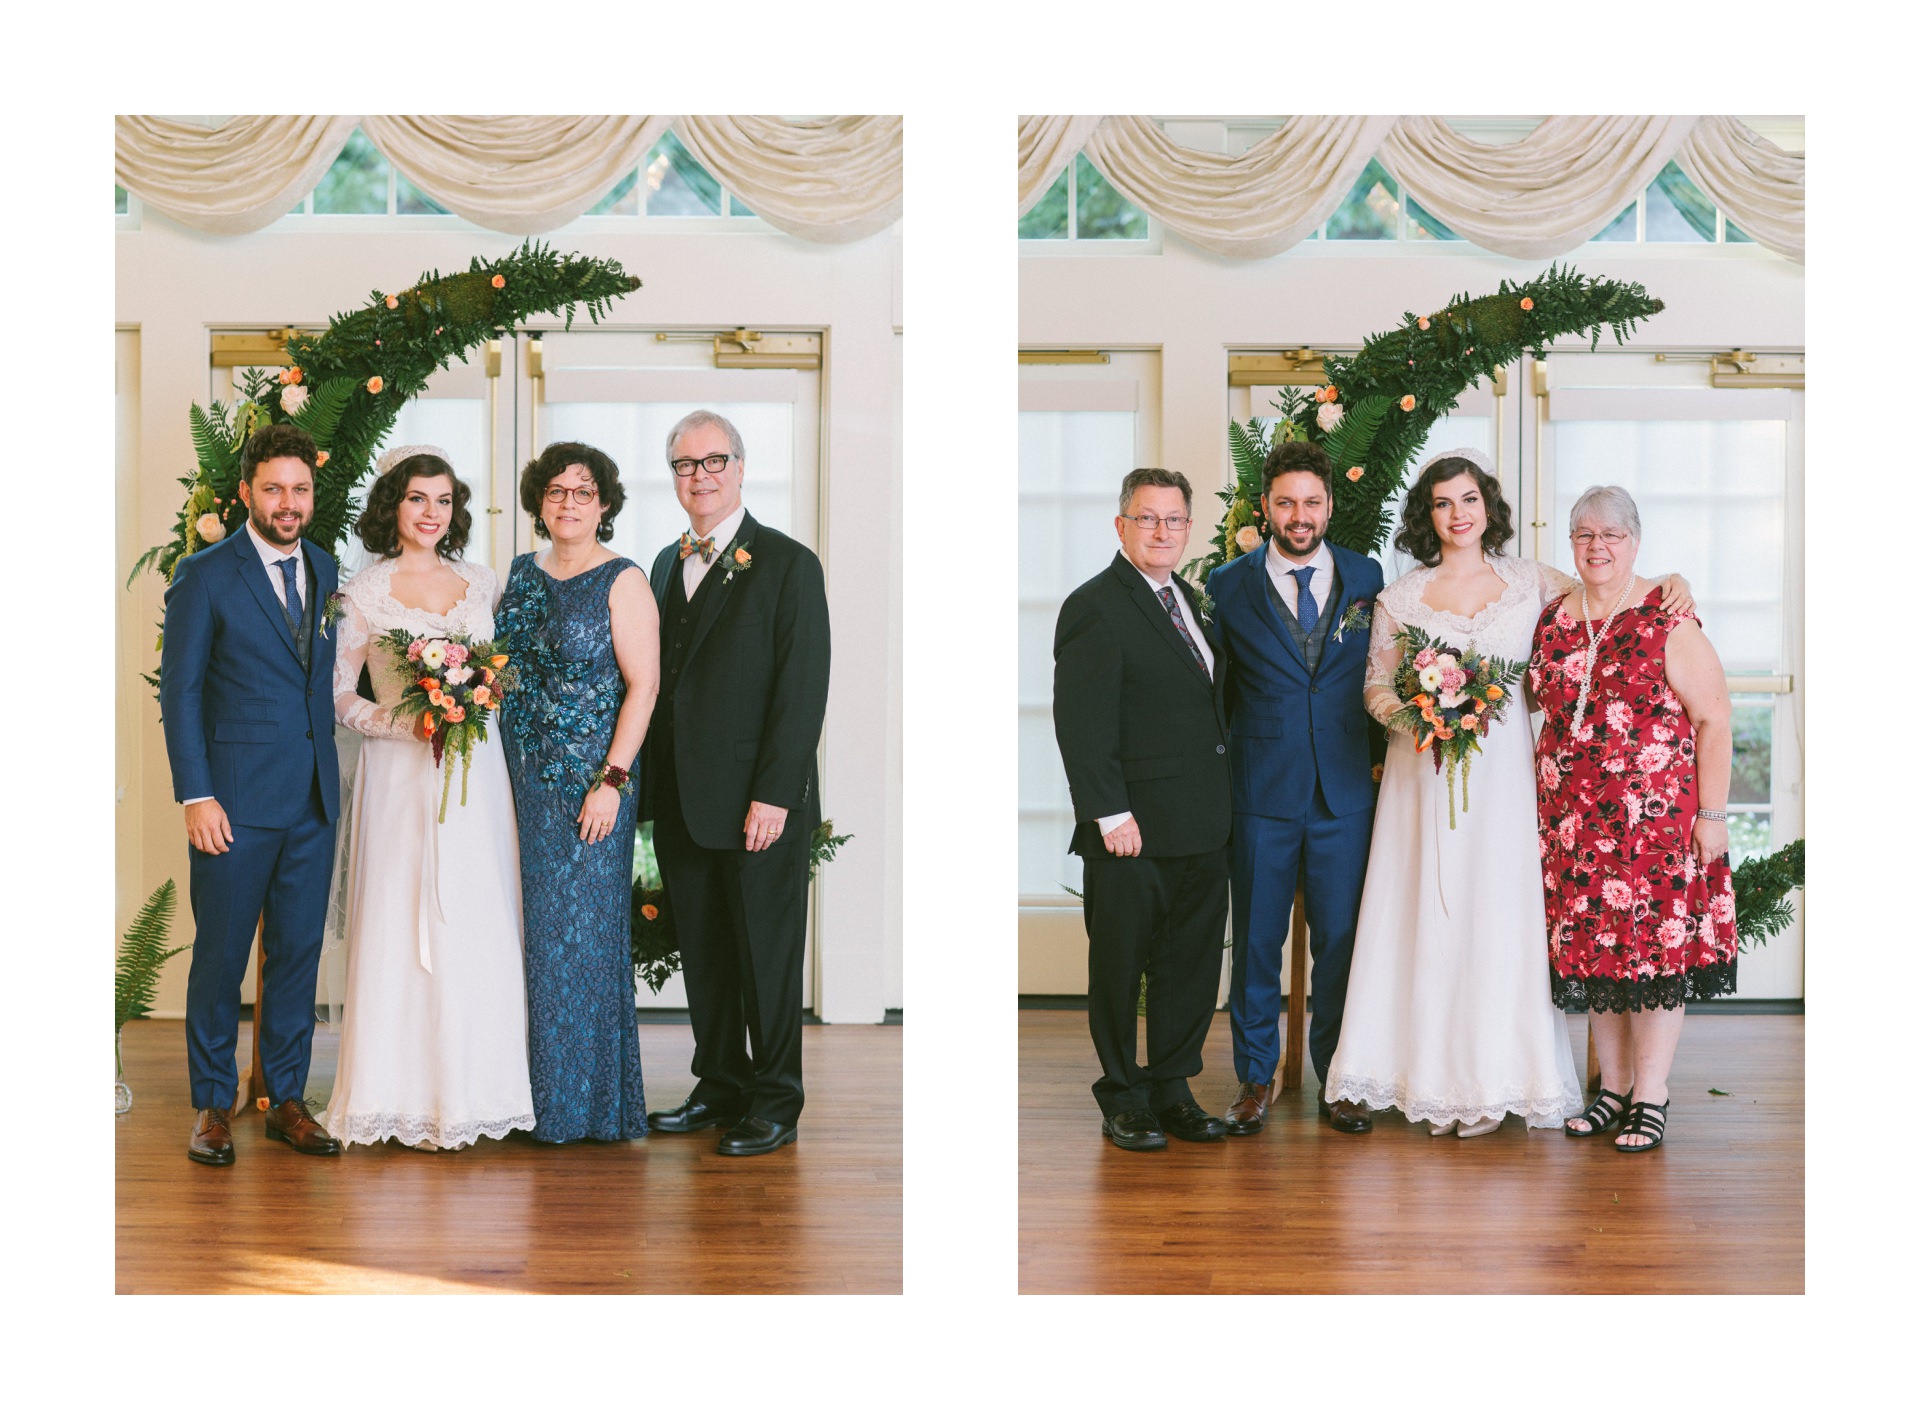 Wedding at the Glidden House in Cleveland 2 15.jpg